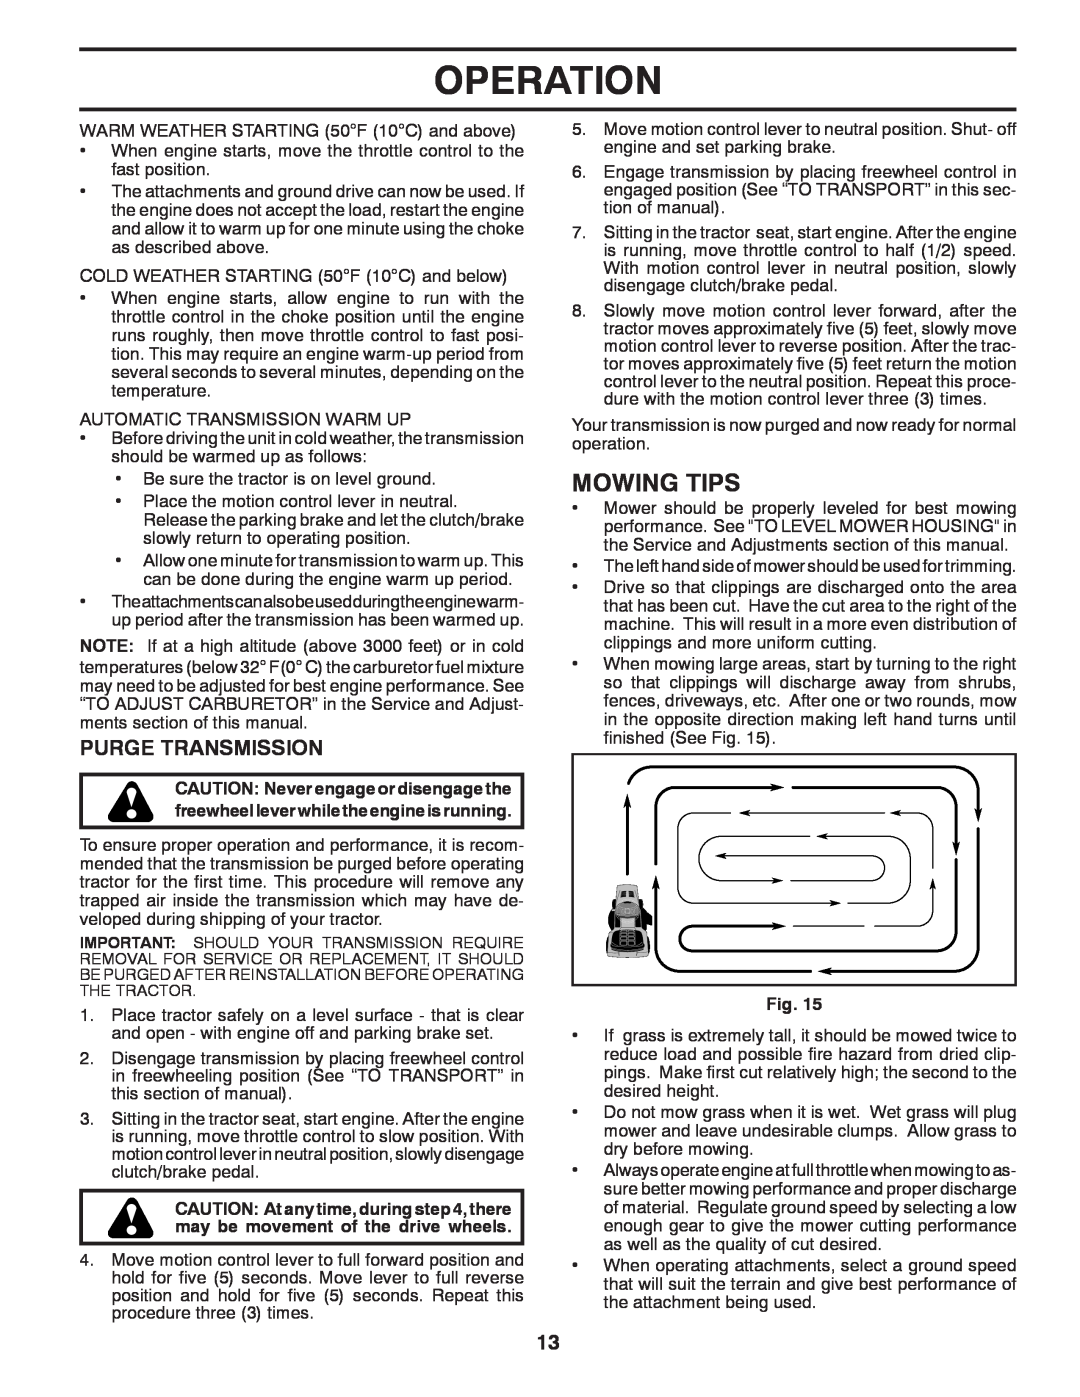 McCulloch 96041018001 manual Mowing Tips, Operation, Purge Transmission 